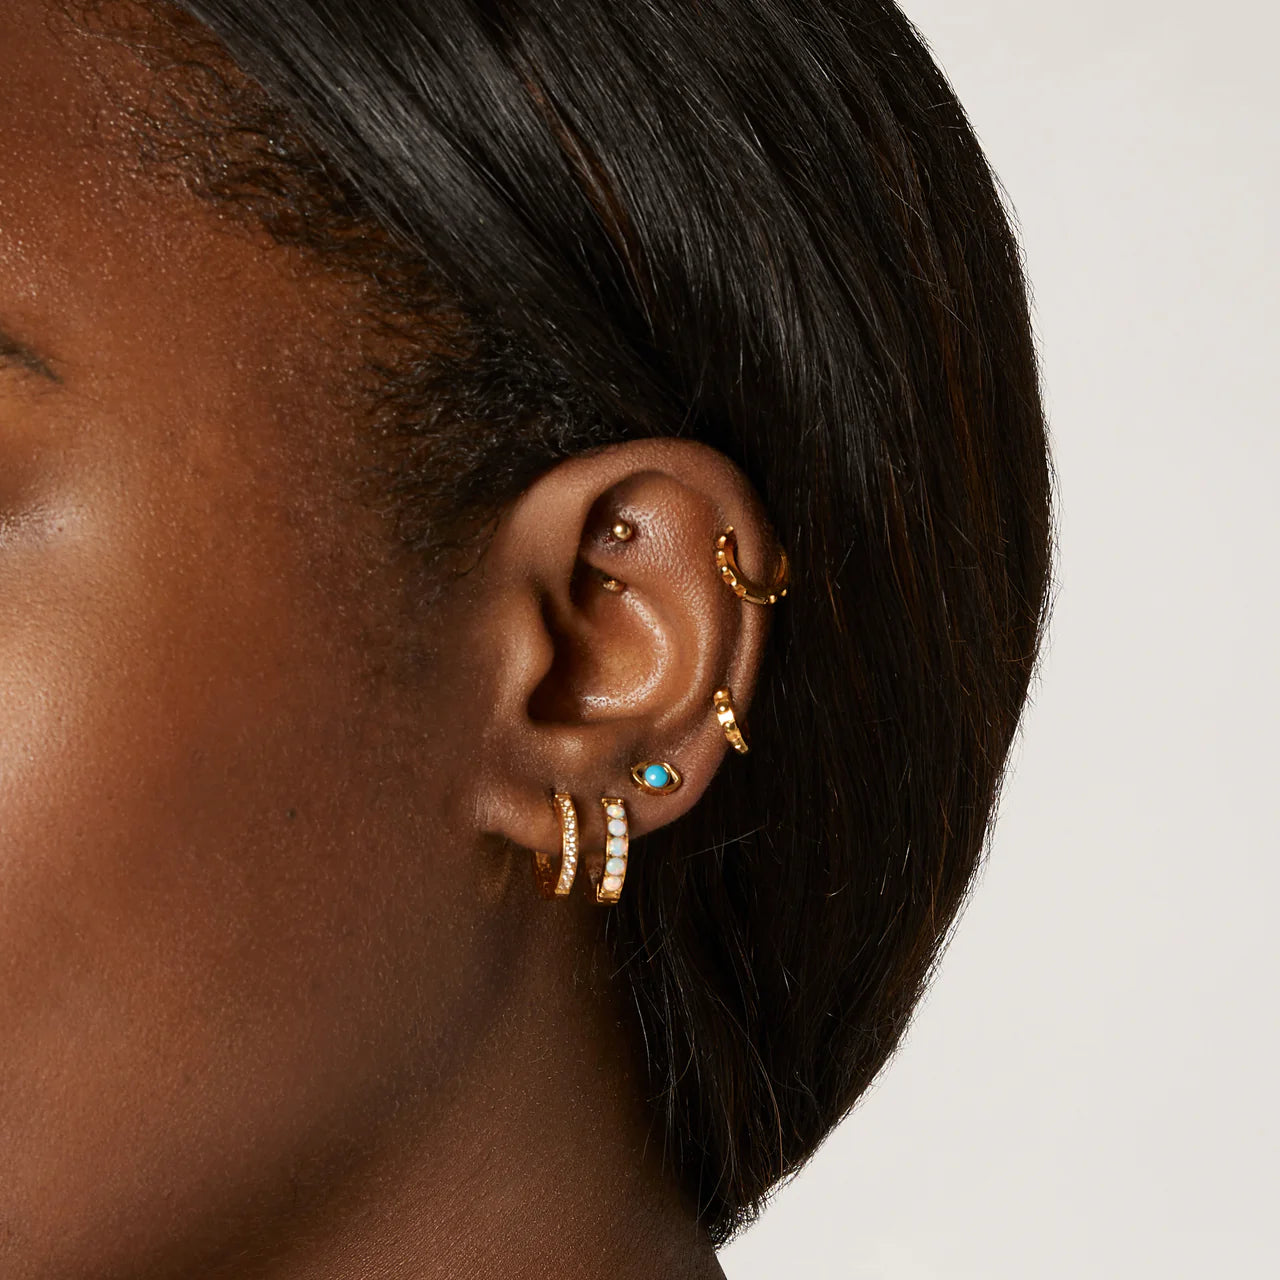 Tips and Tricks to Wearing Flat Back Earrings